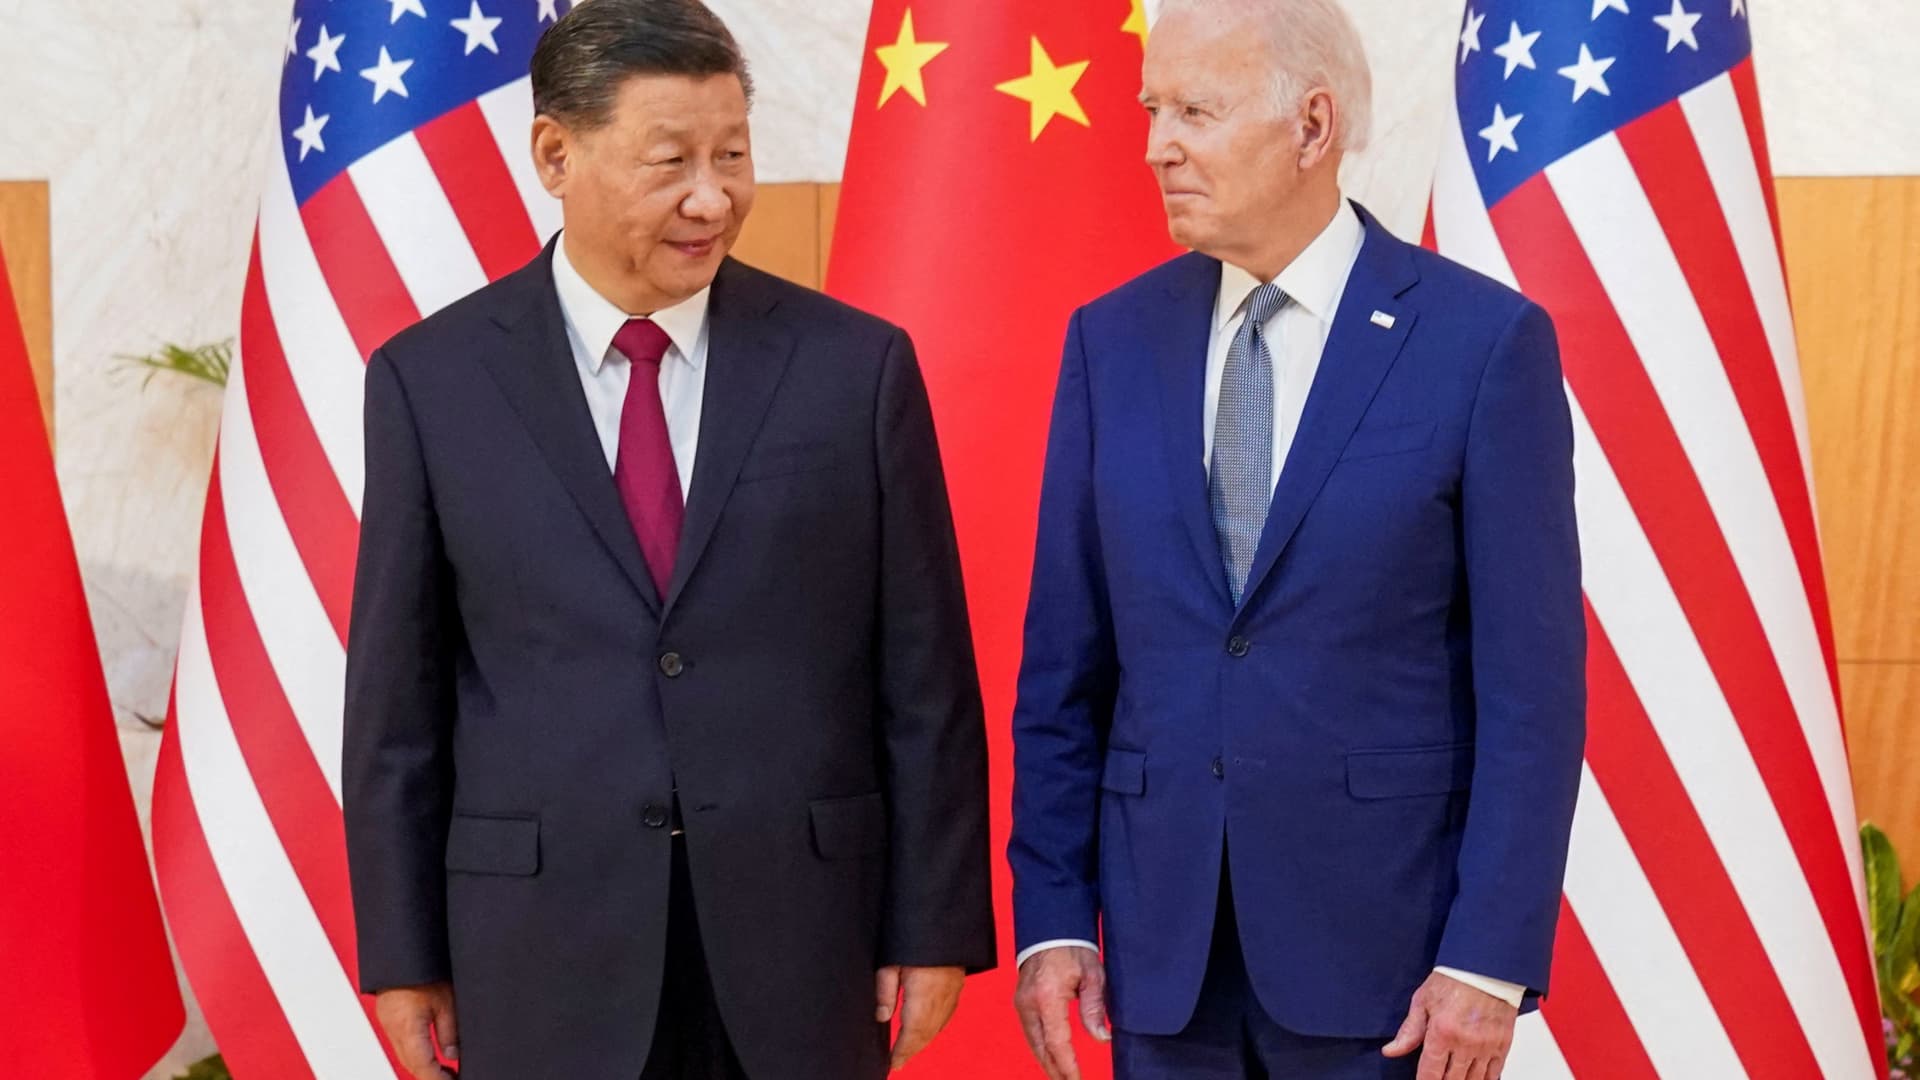 Many applauded the Biden-Xi meeting, but one strategist is skeptical about what it means for trade